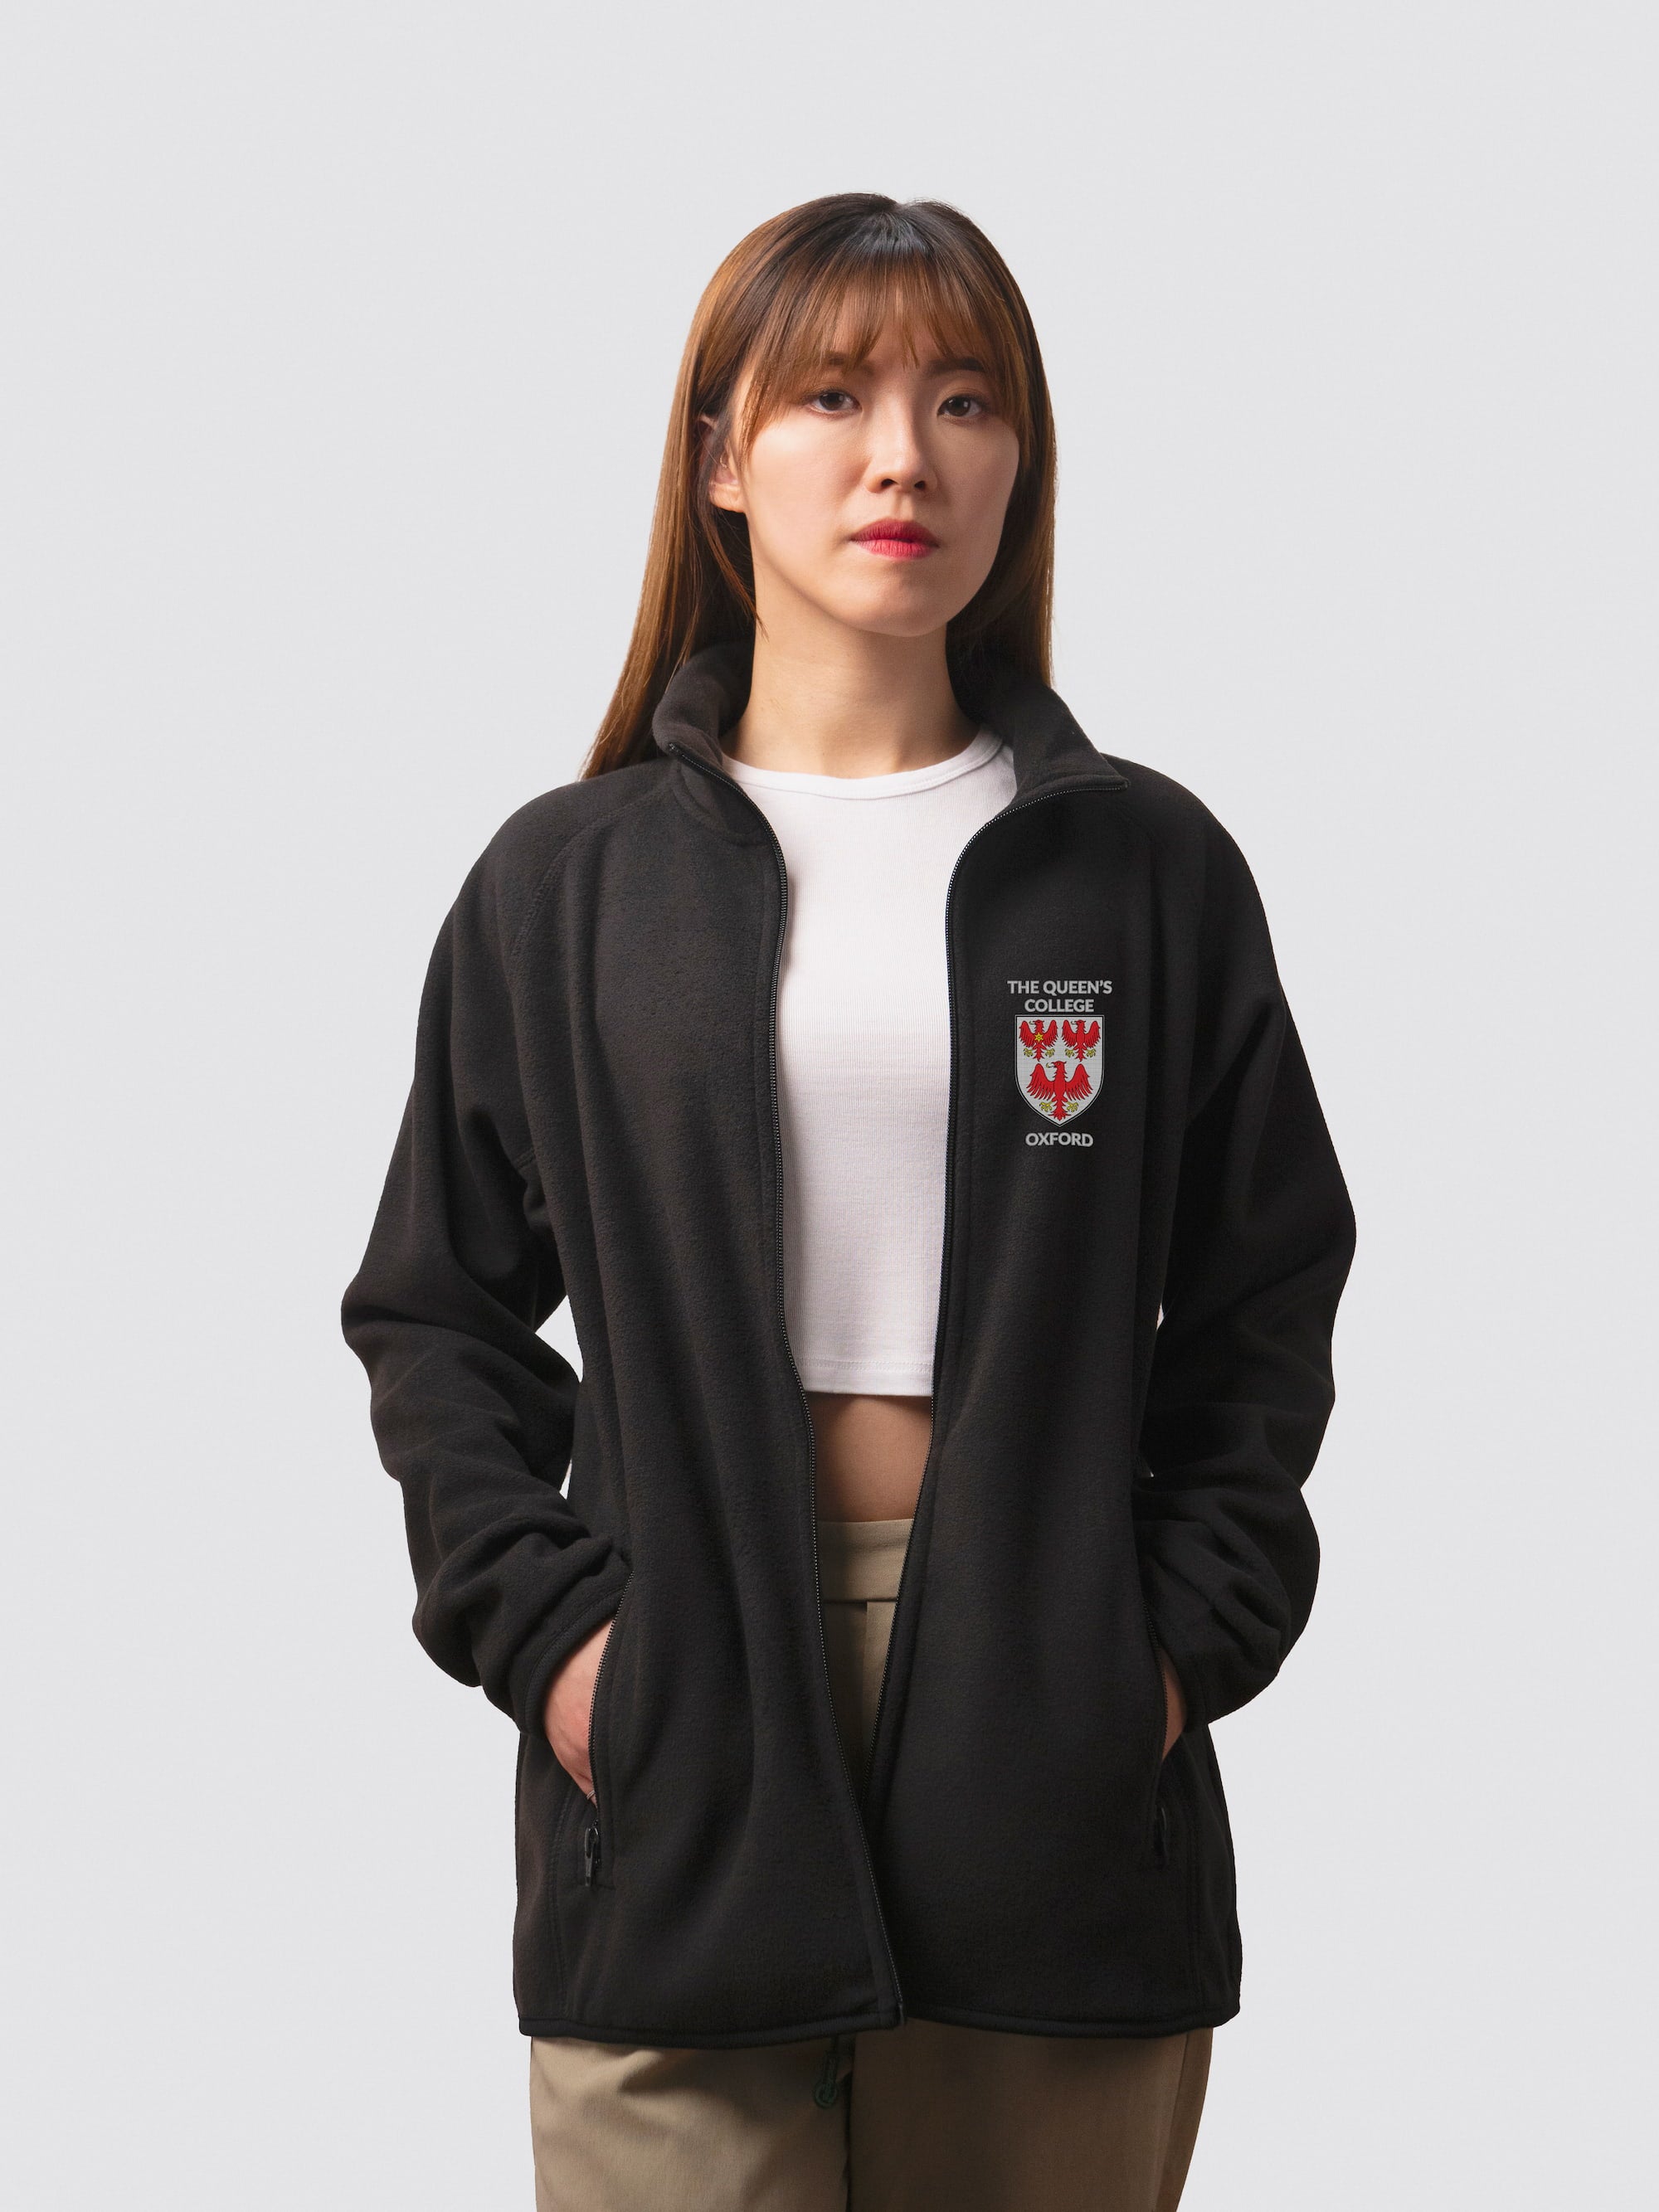 Custom student fleece, with The Queen's crest on the left chest